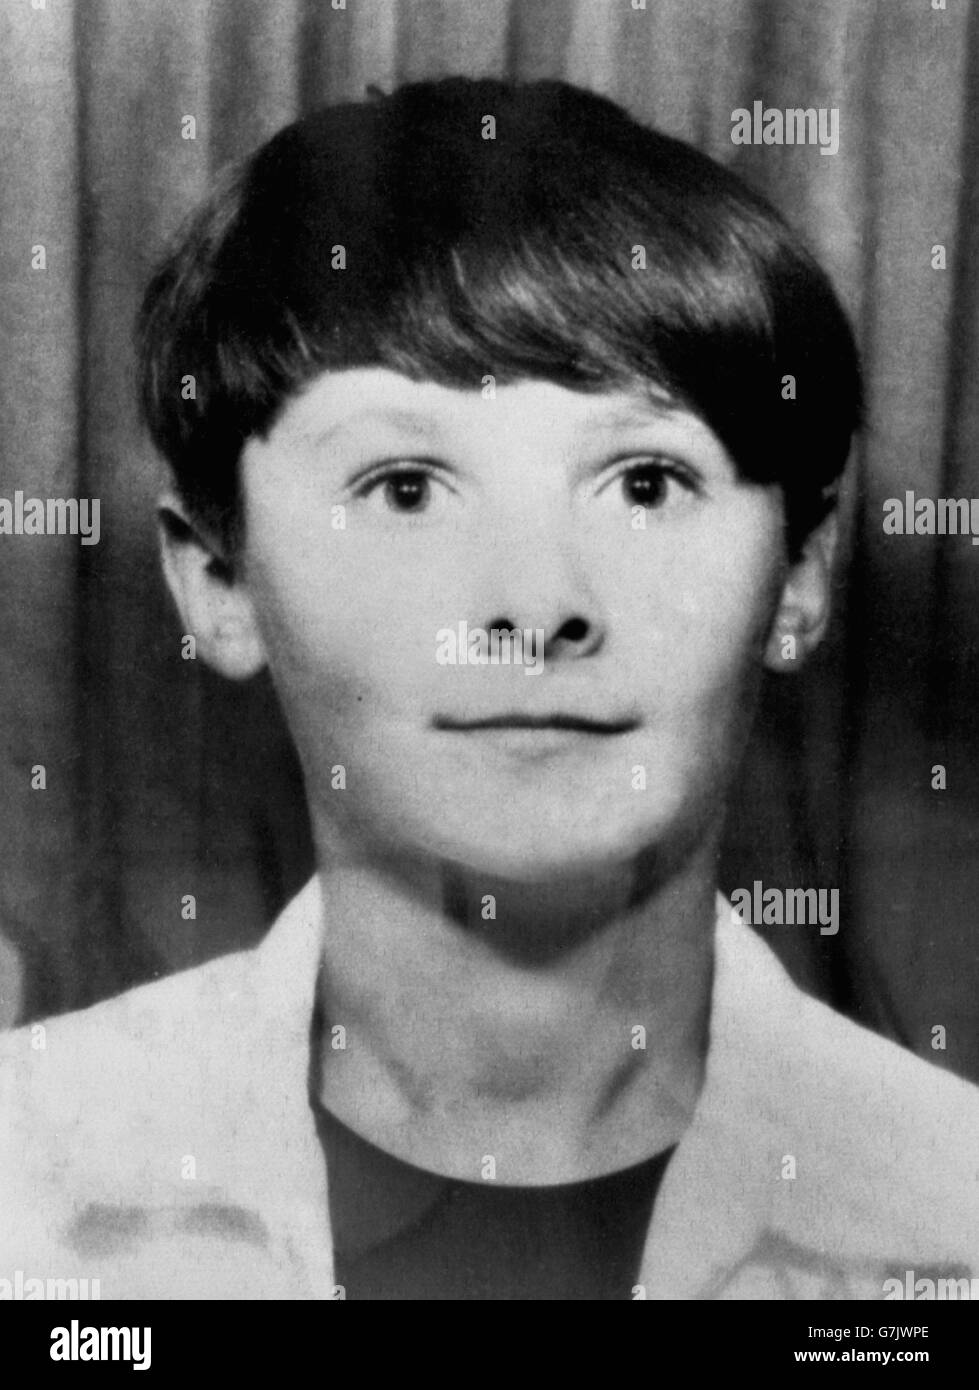 Crime - Missing Boy Scout Appeal - Paul Kingsley Stock Photo - Alamy